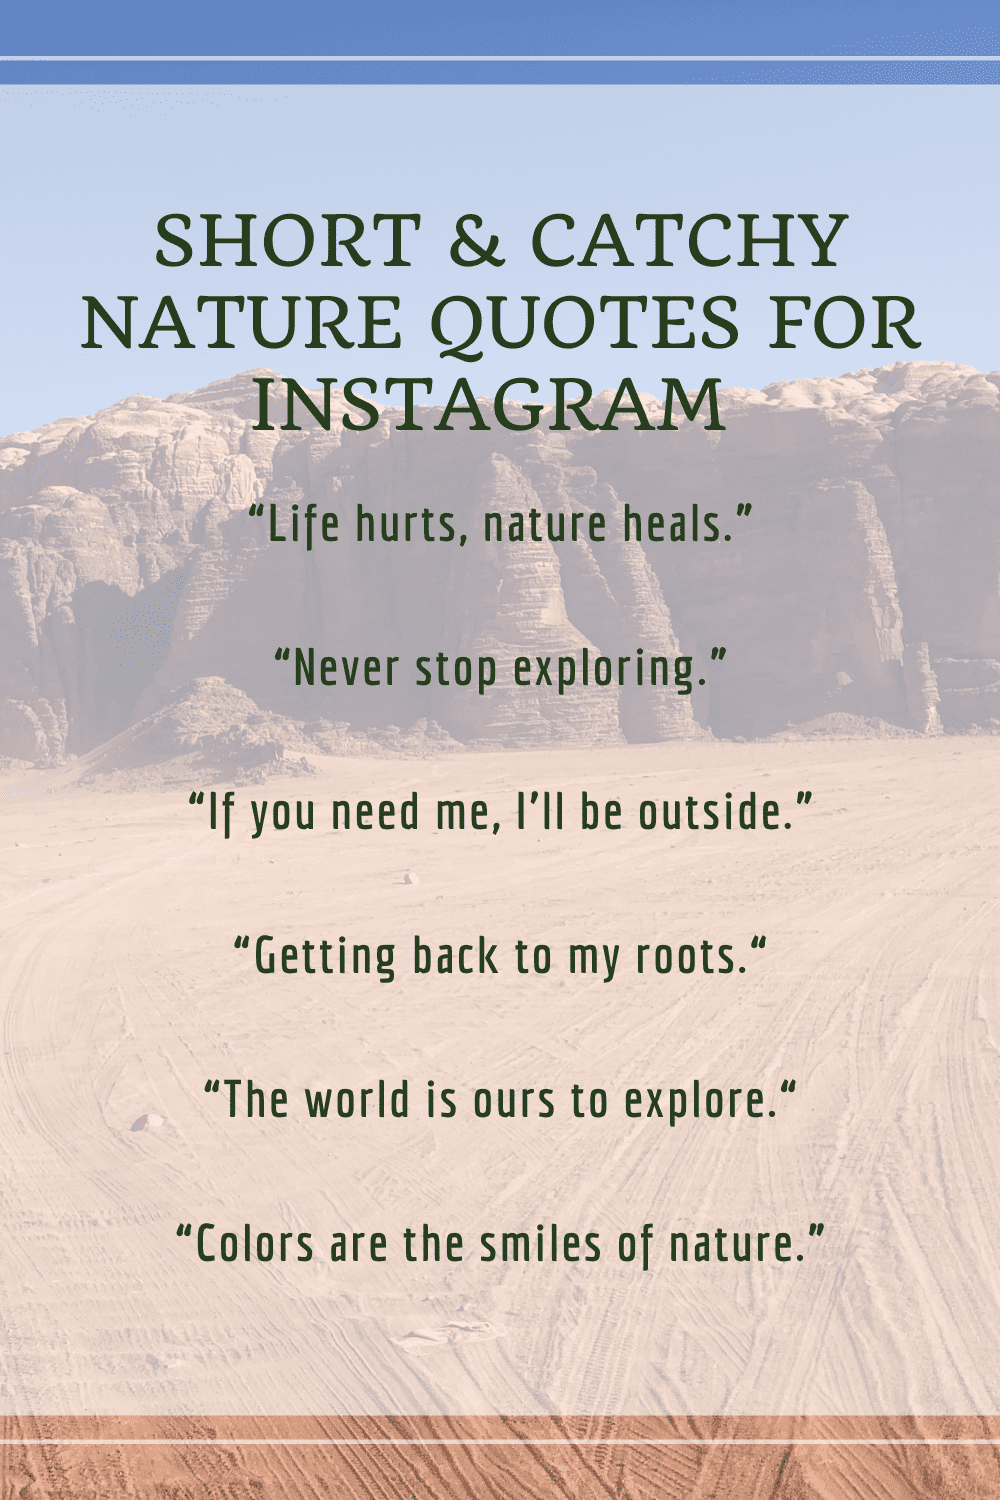 Short & Catchy Nature Quotes